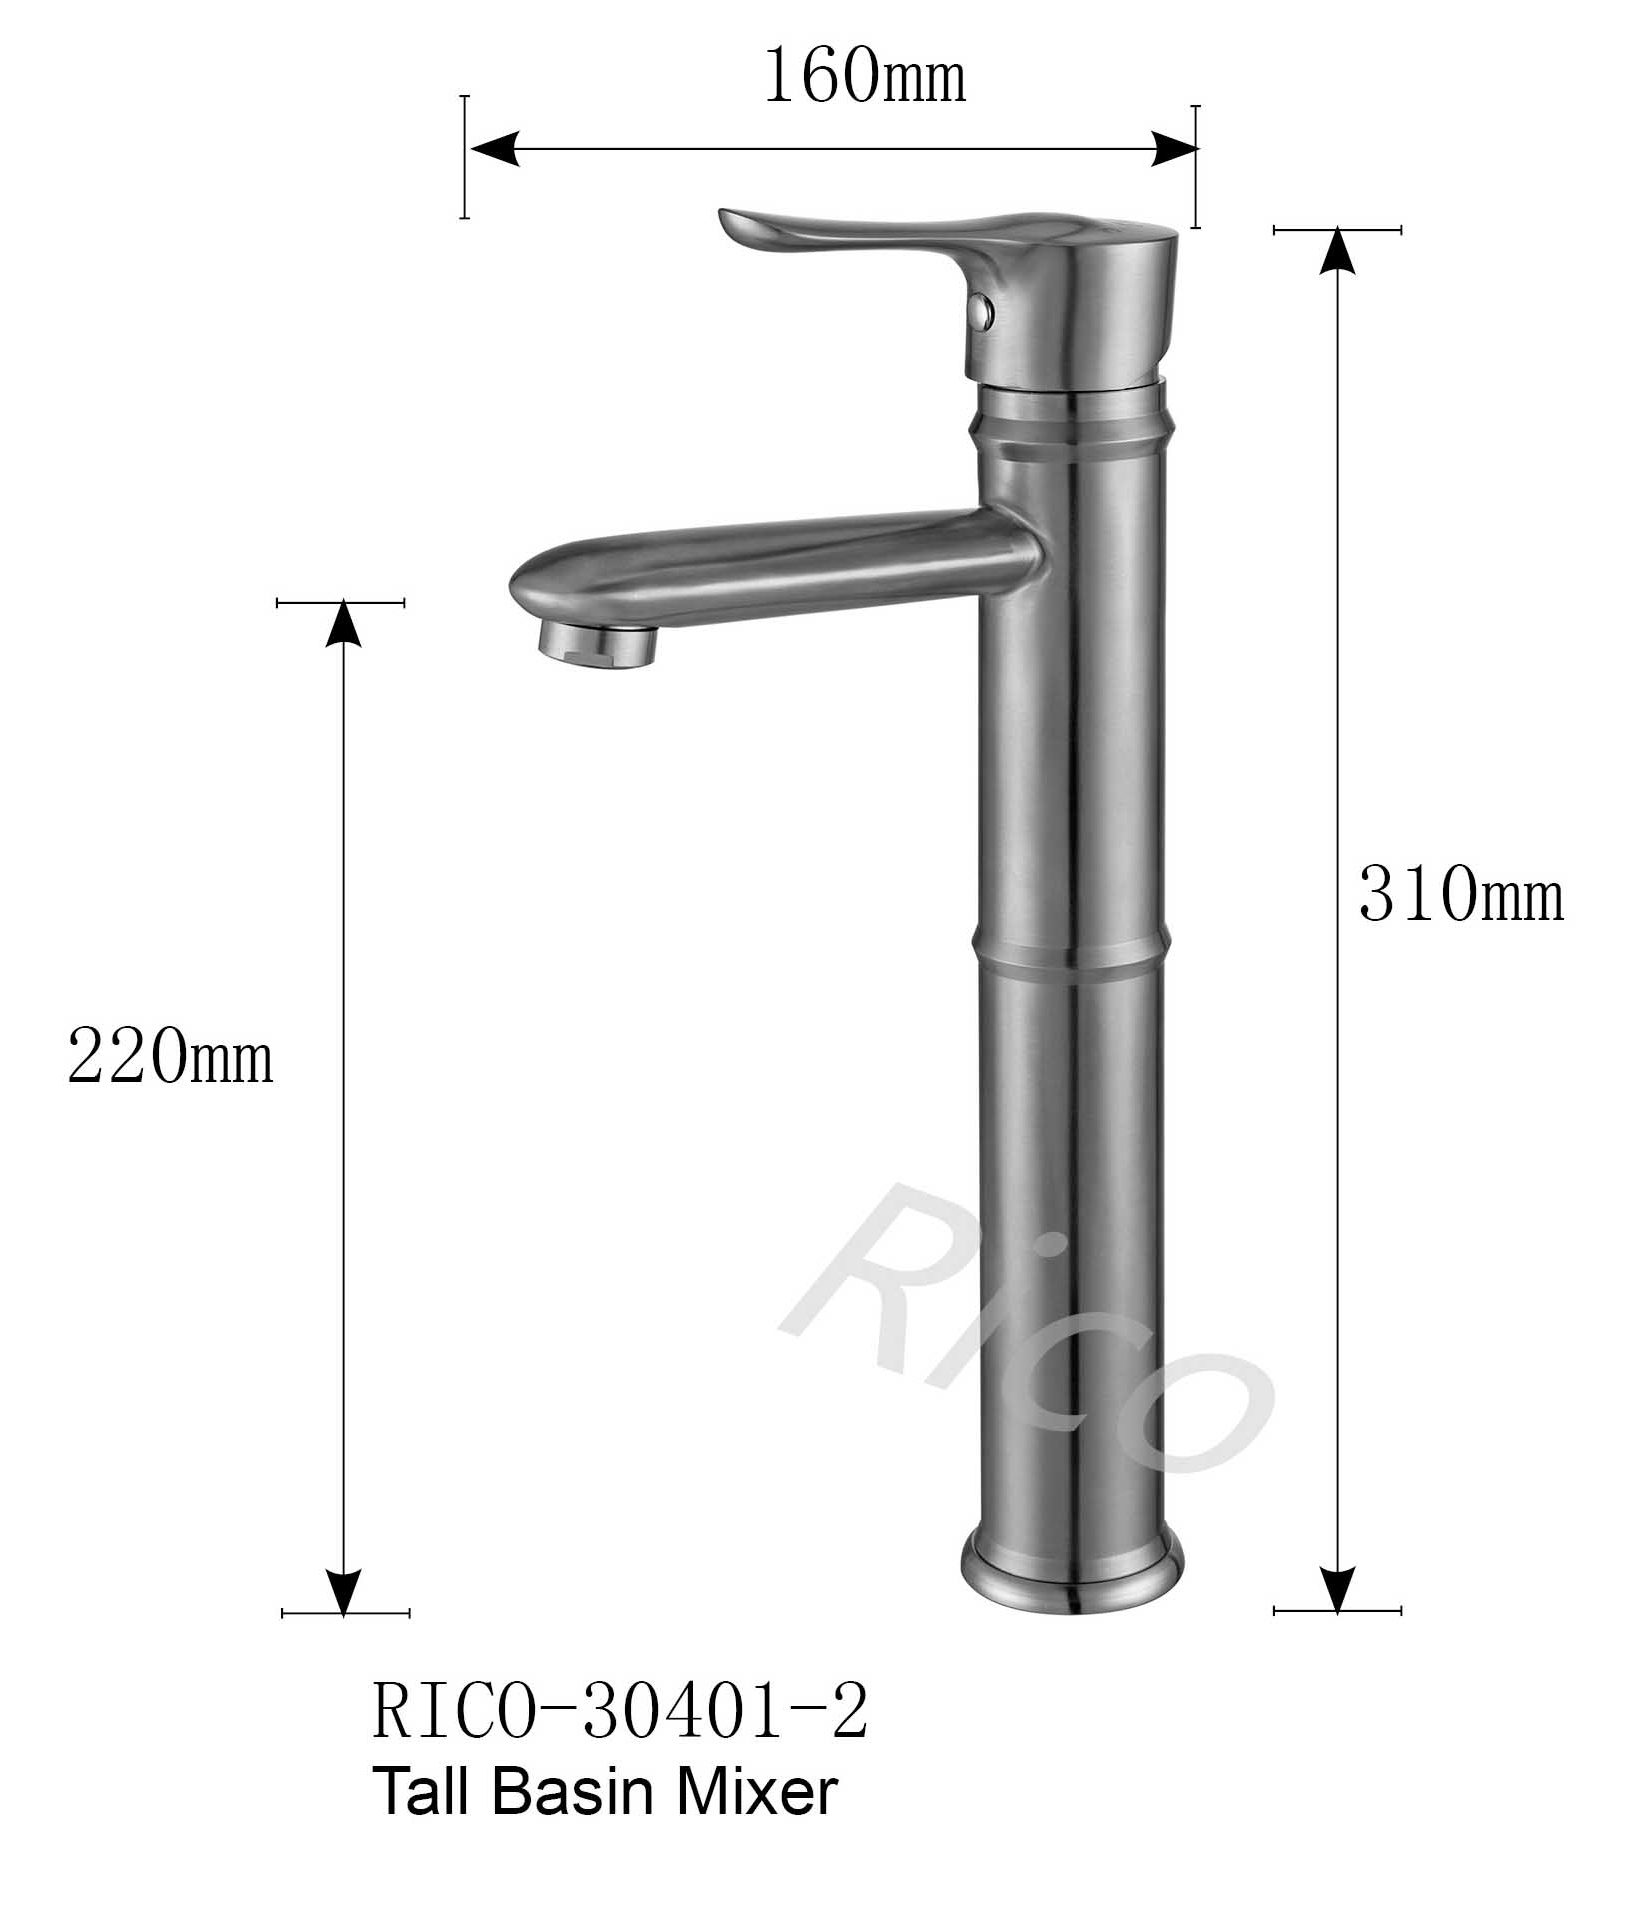 Rico : Stainless Steel Tall Basin Mixer – RICO-30401-2